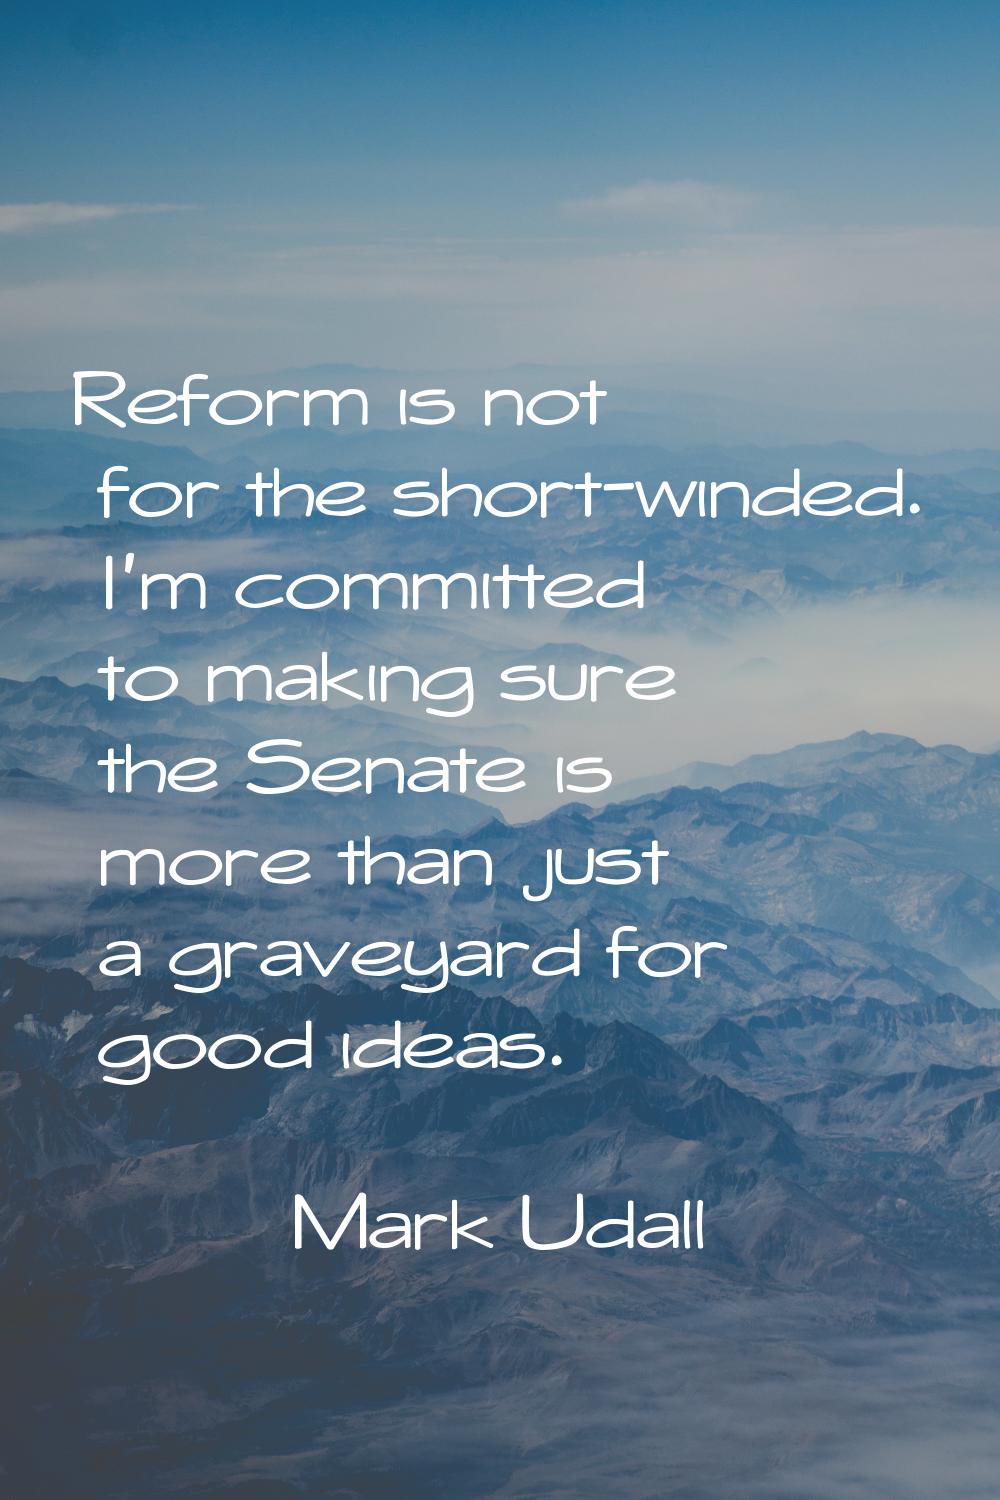 Reform is not for the short-winded. I'm committed to making sure the Senate is more than just a gra